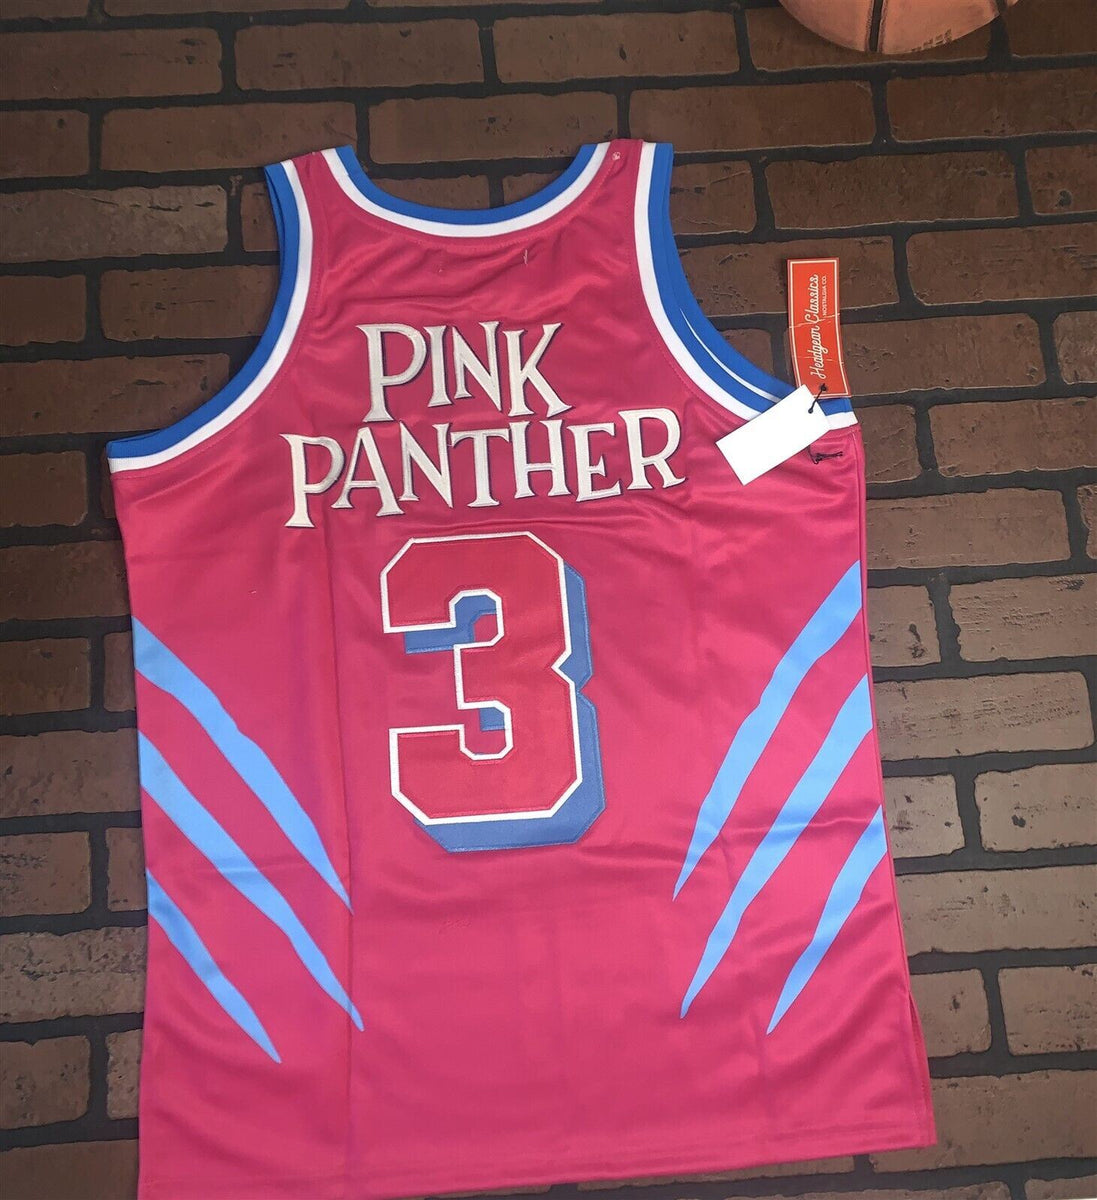 PINK PANTHER / MIAMI RED Headgear Classics Basketball Jersey